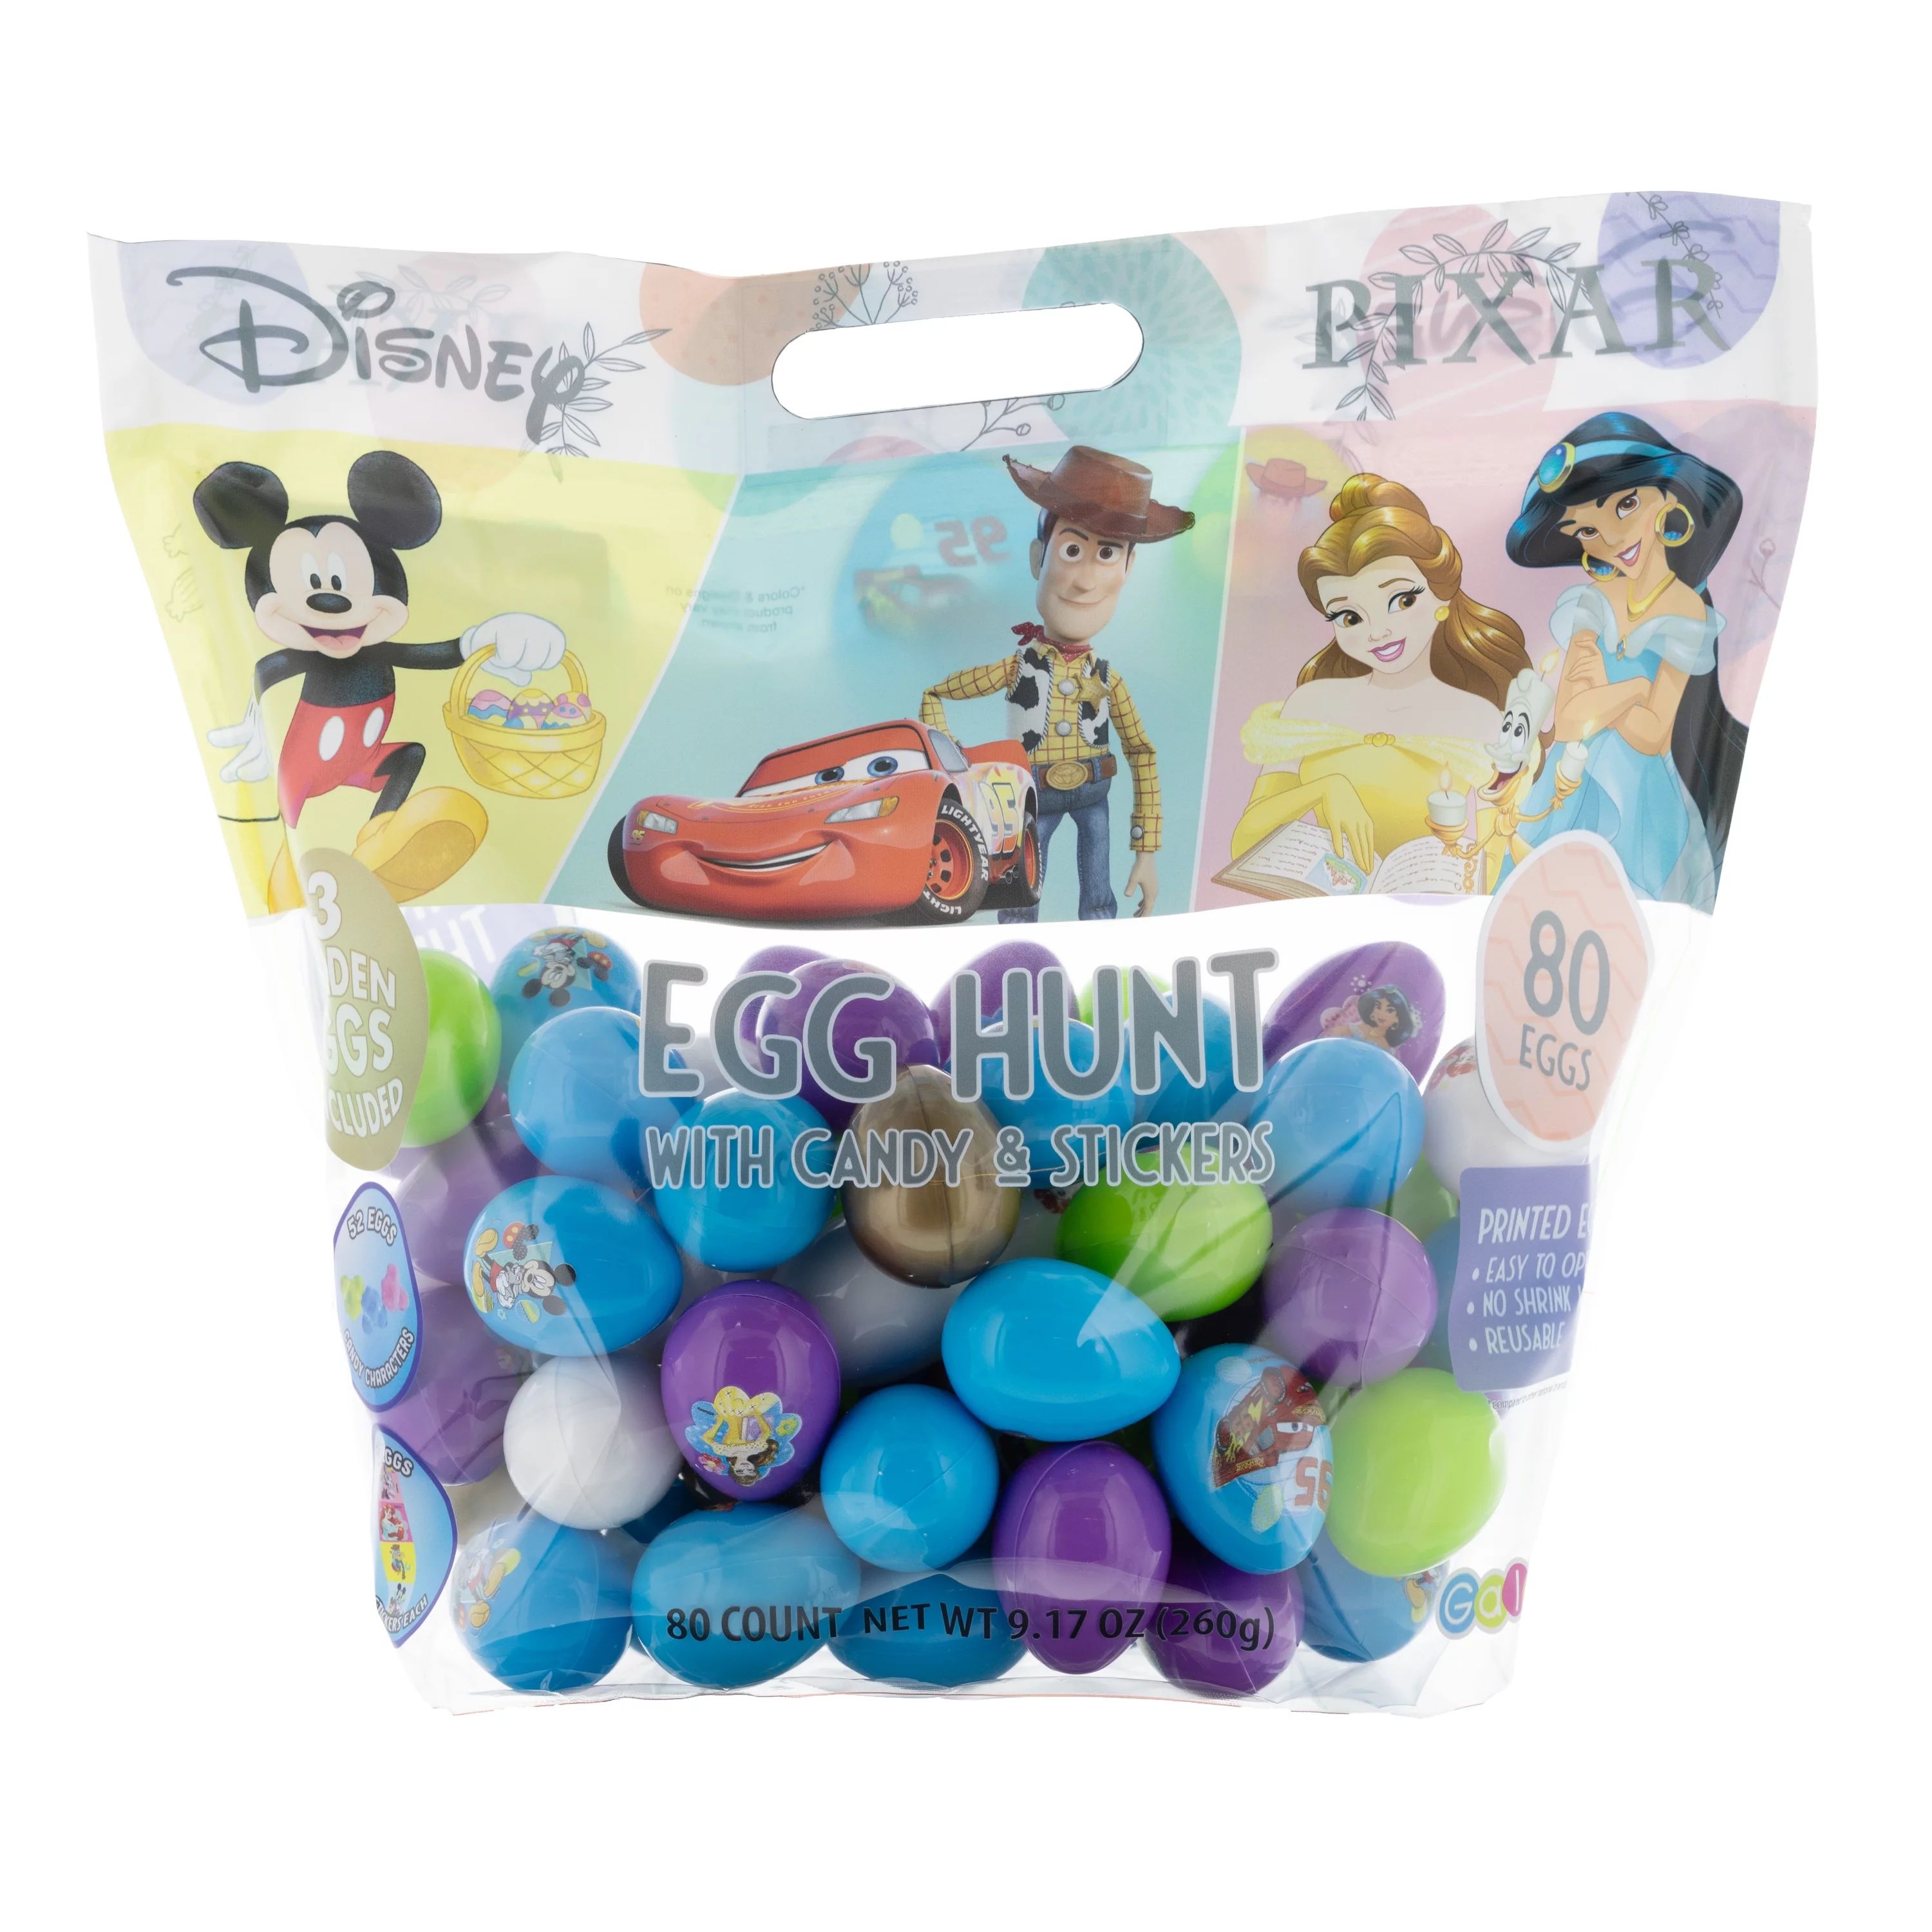 Disney and Pixar Mix 80 Count Egg Hunt Bag with Candy and Stickers, 9.17 oz | Walmart (US)